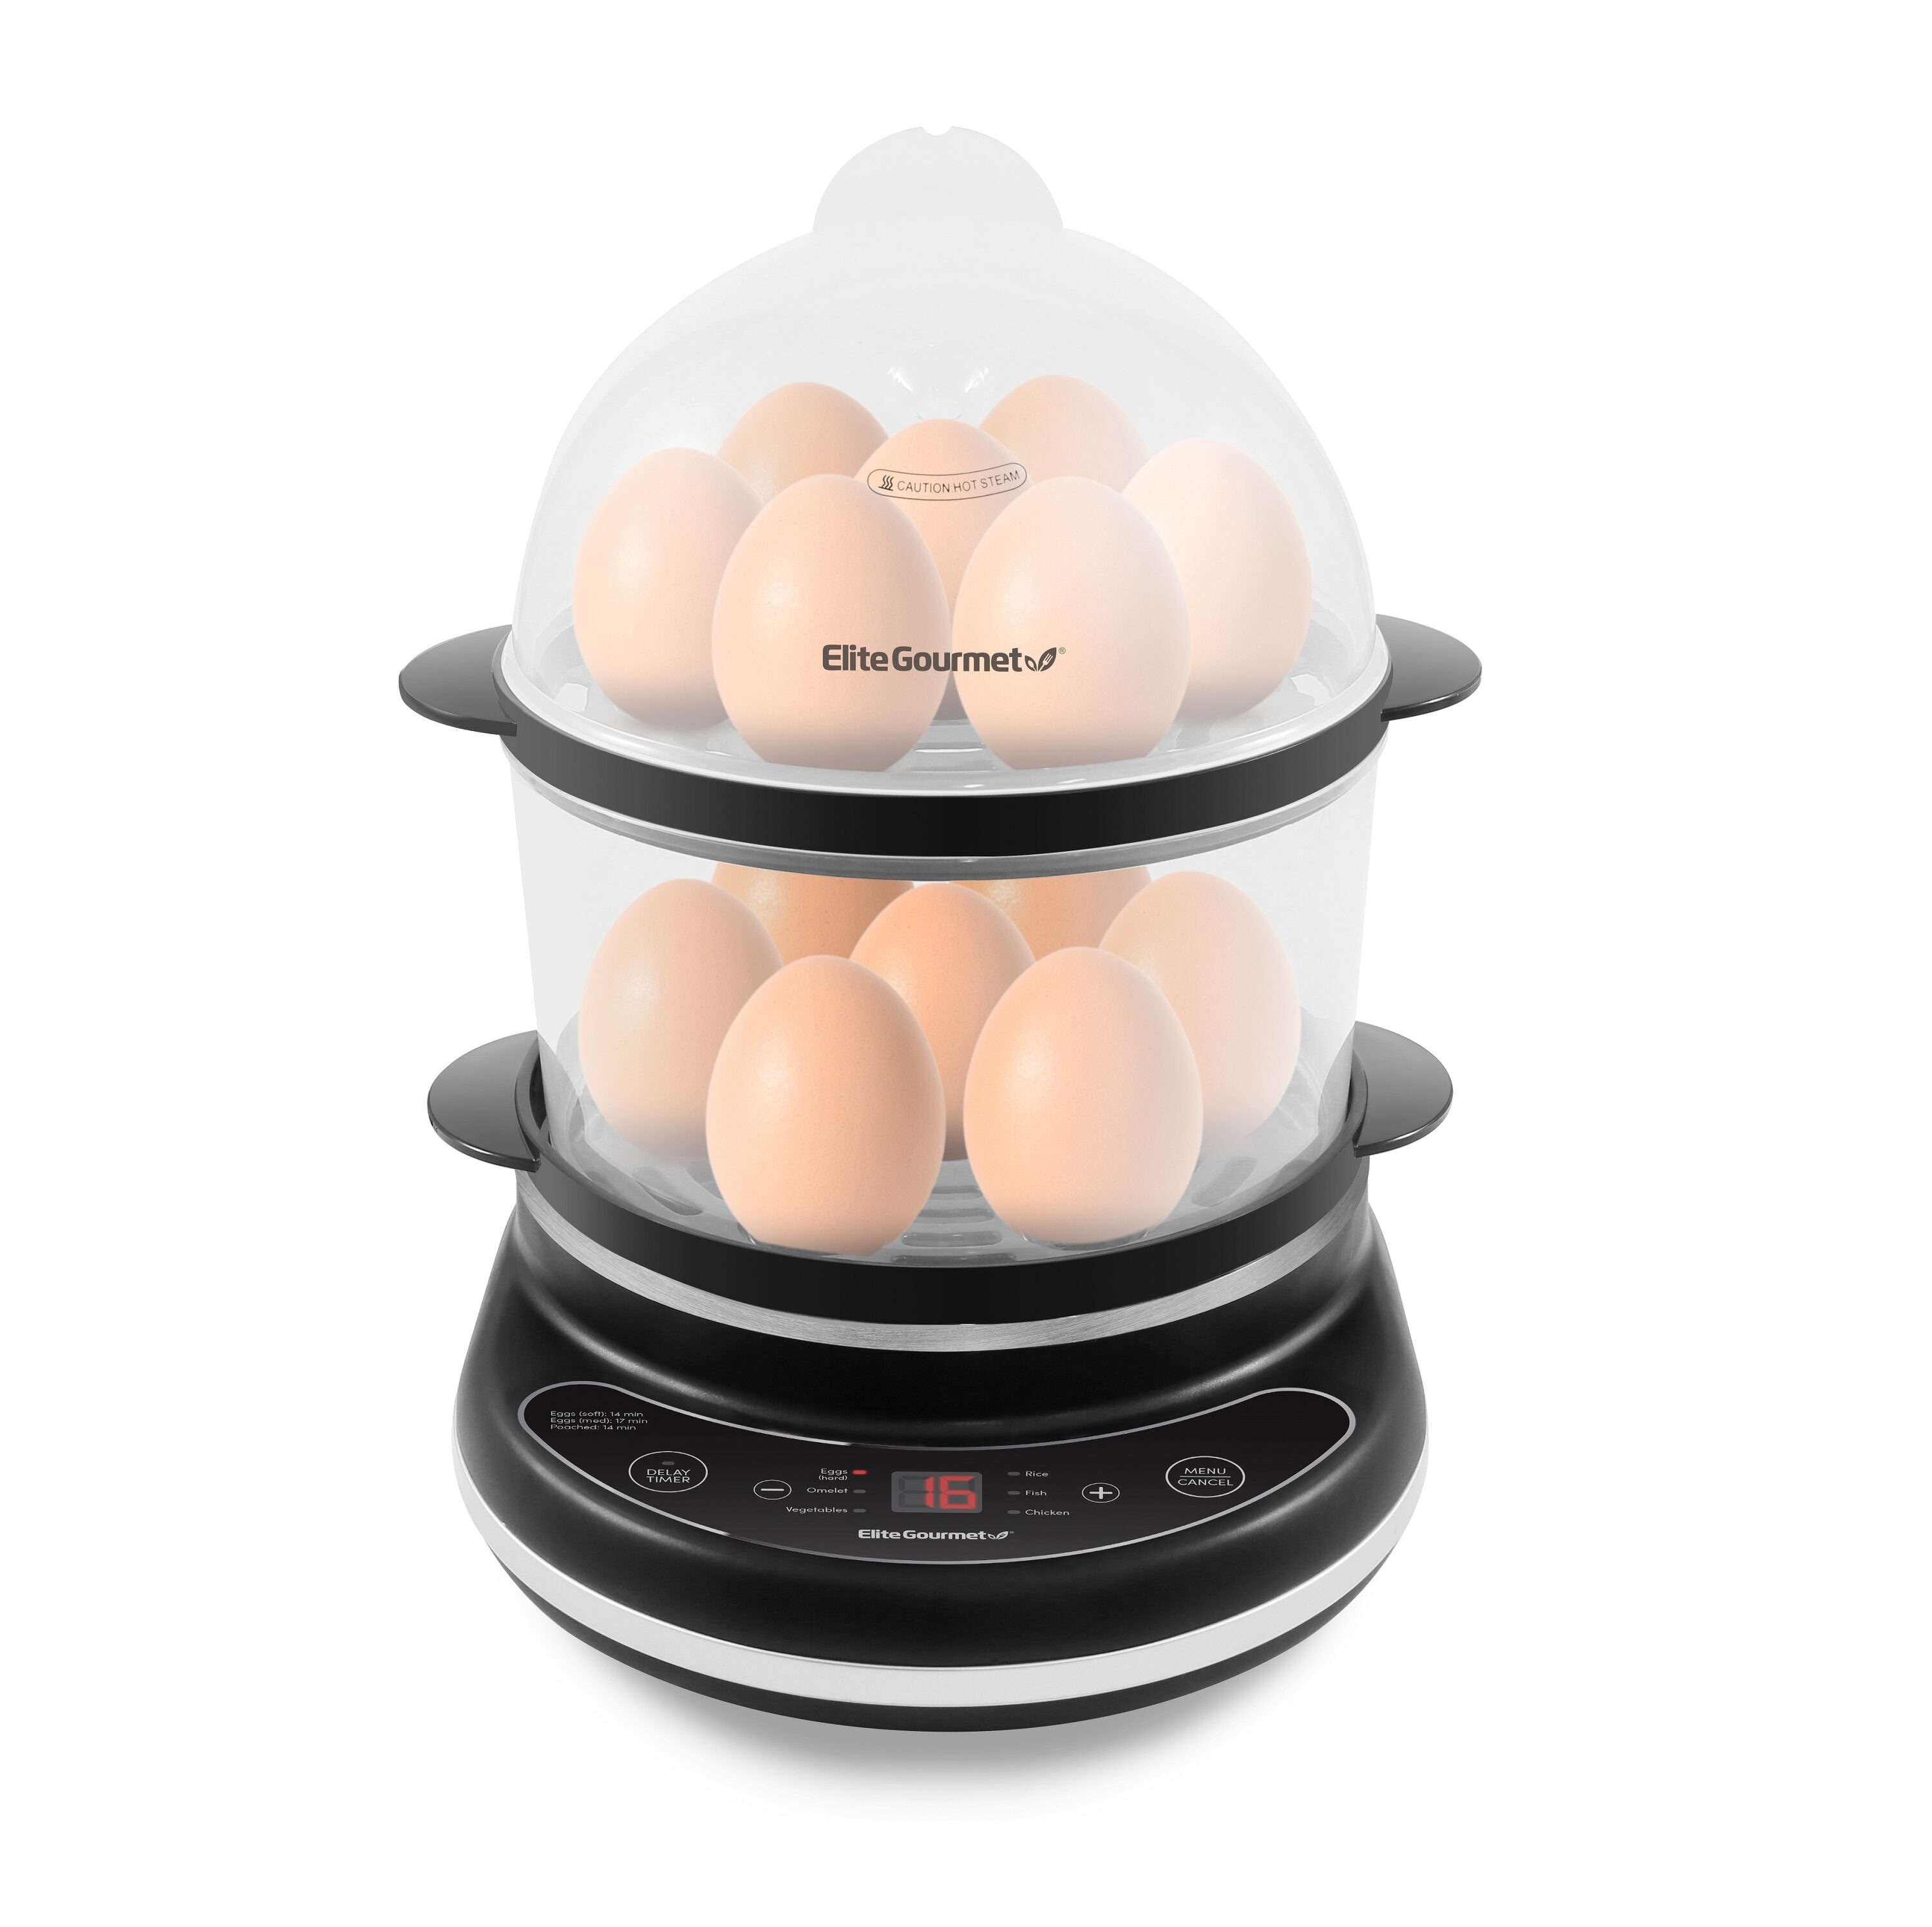 Hamilton Beach 3-in-1 Egg Cooker, Hard-Boiled, Poached, Omelets